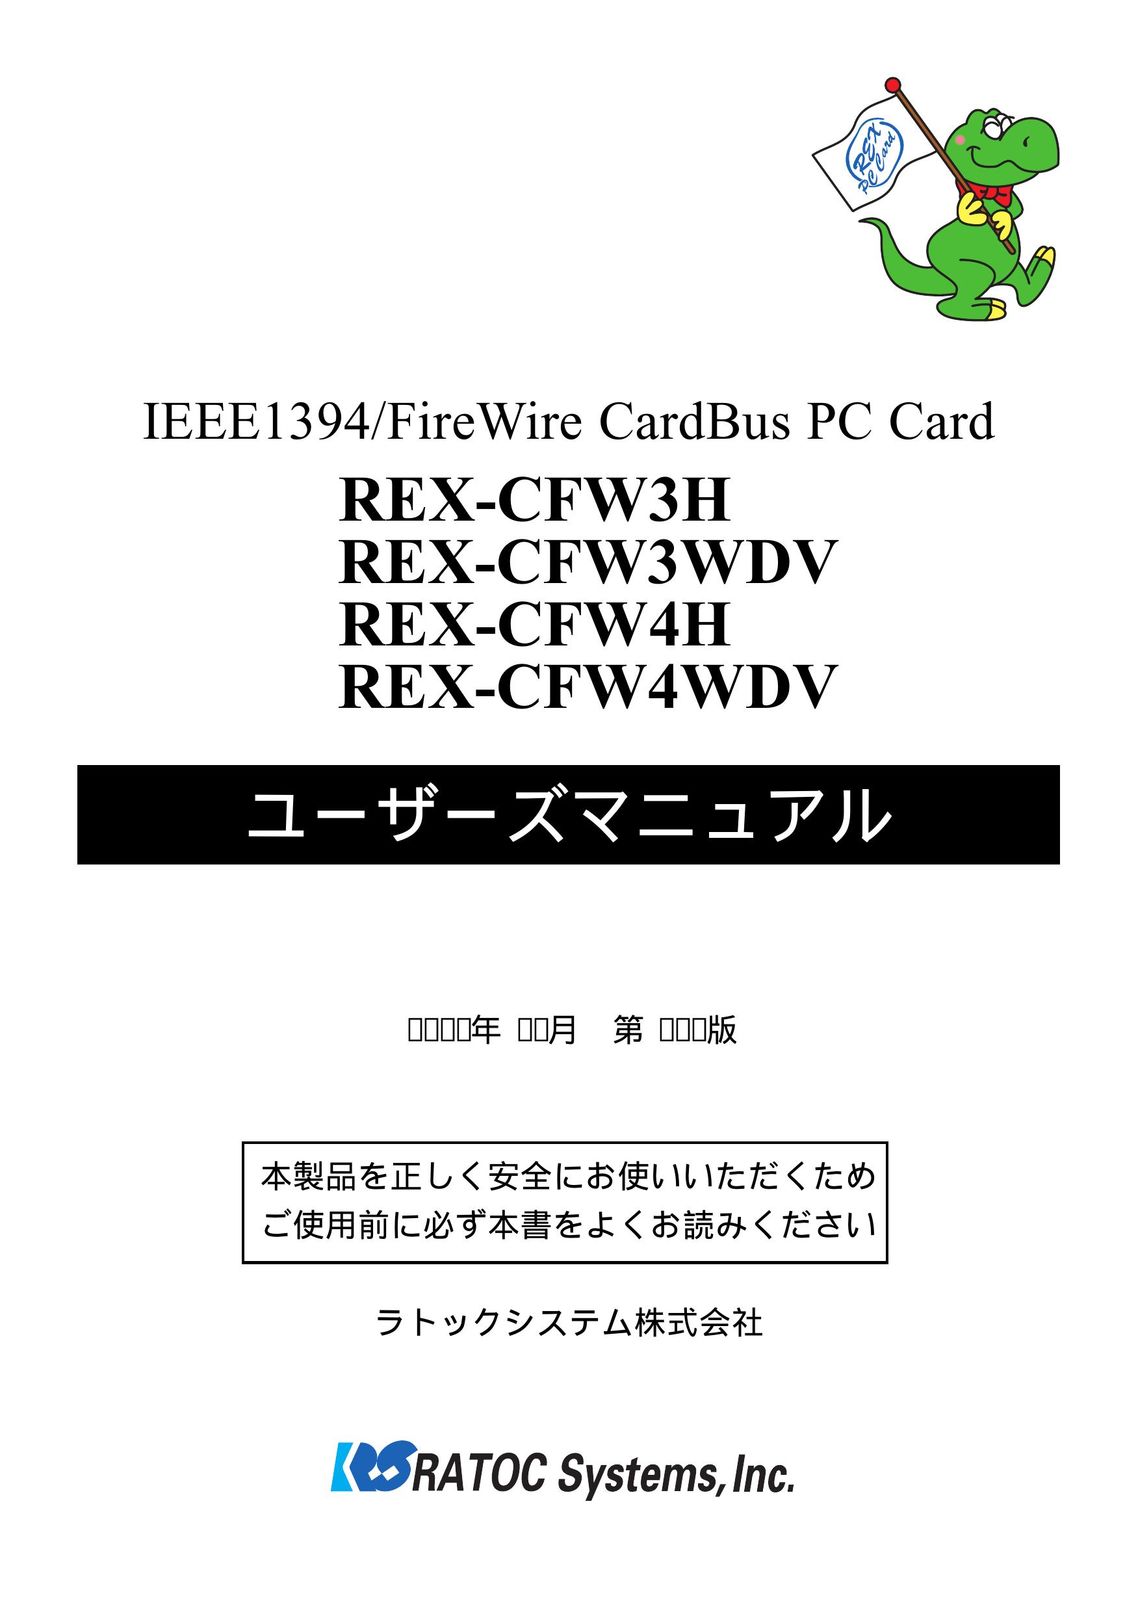 Ratoc Systems REX-CFW3H Network Card User Manual